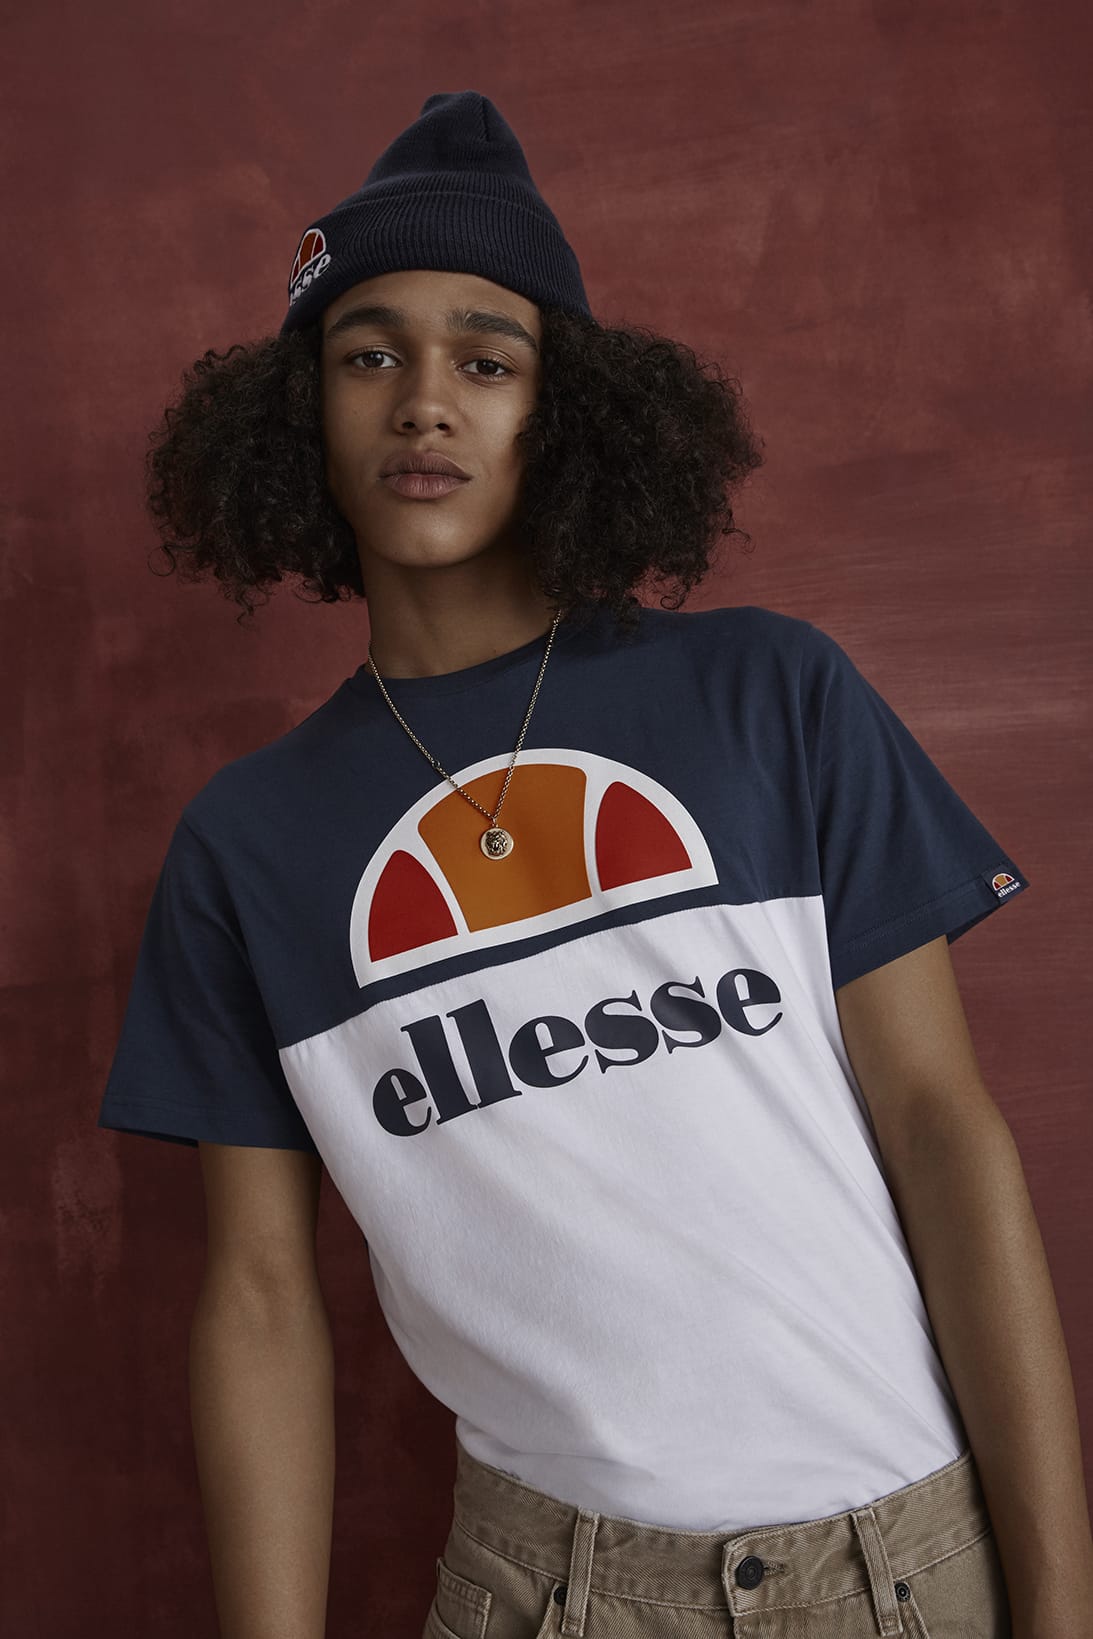 ellesse heritage collection